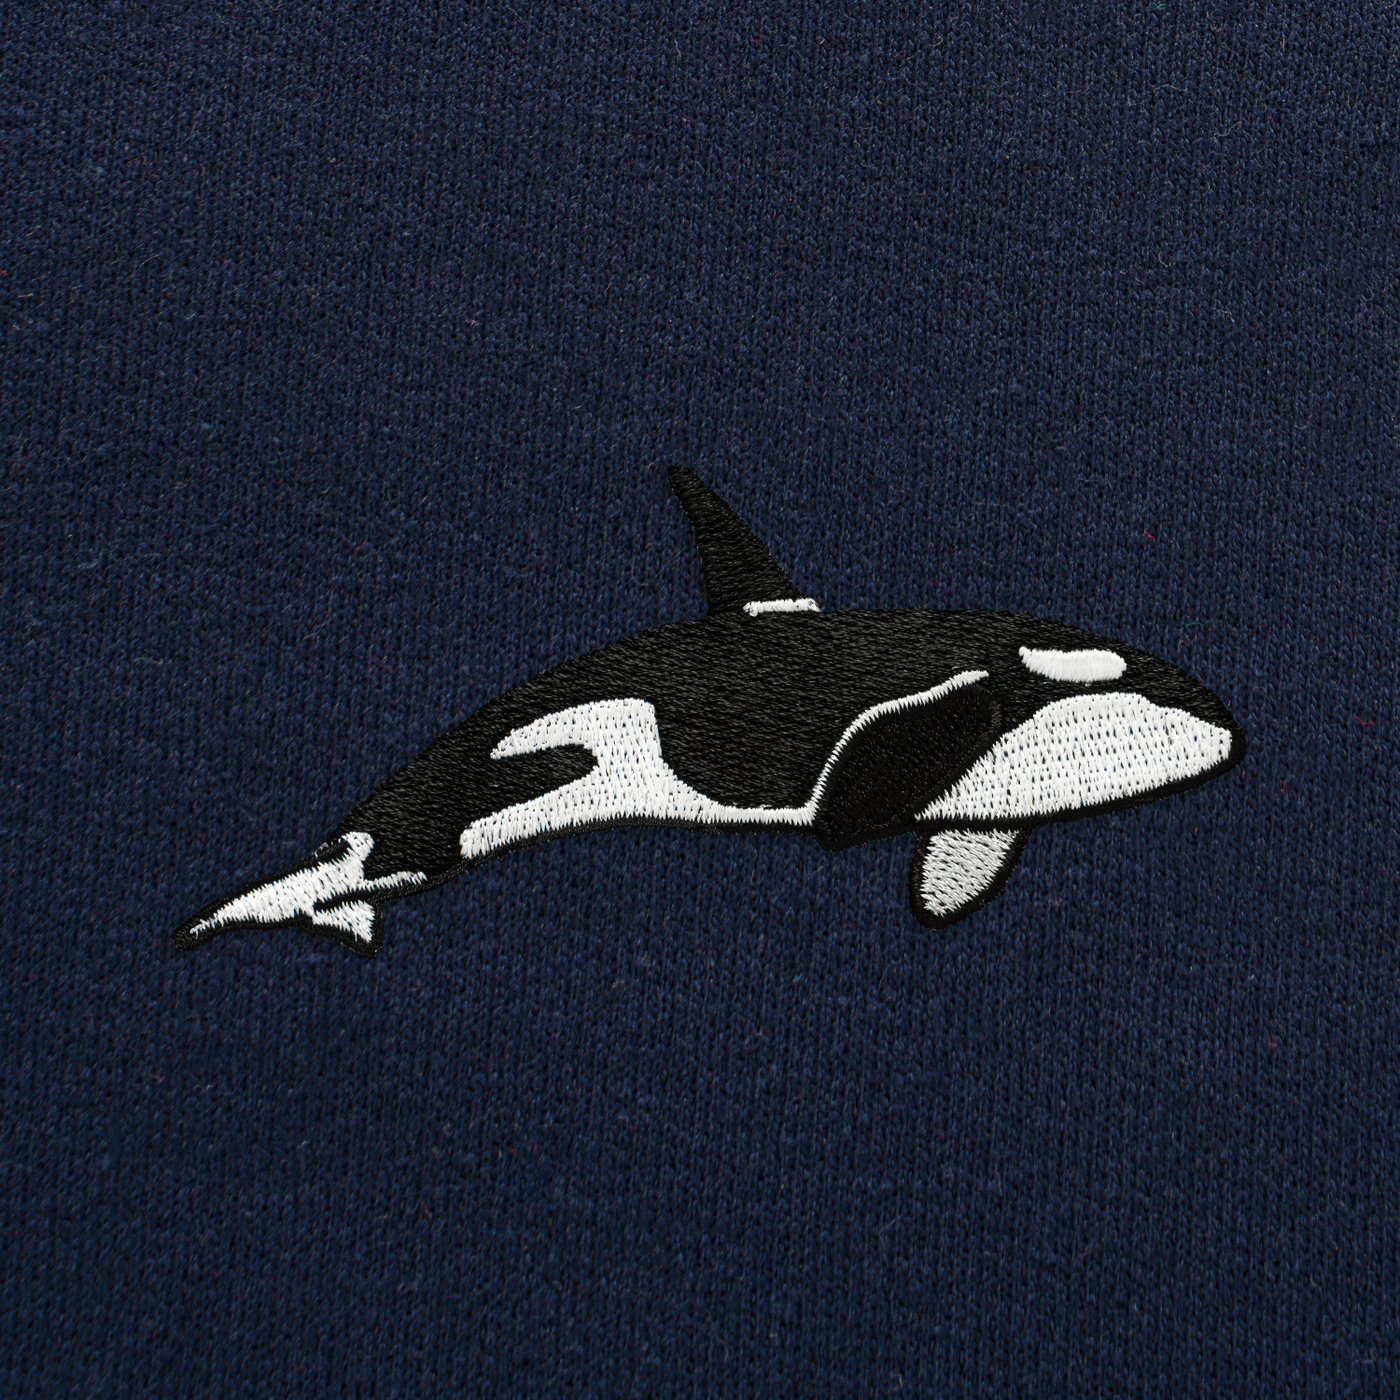 Bobby's Planet Men's Embroidered Orca Sweatshirt from Seven Seas Fish Animals Collection in Navy Color#color_navy